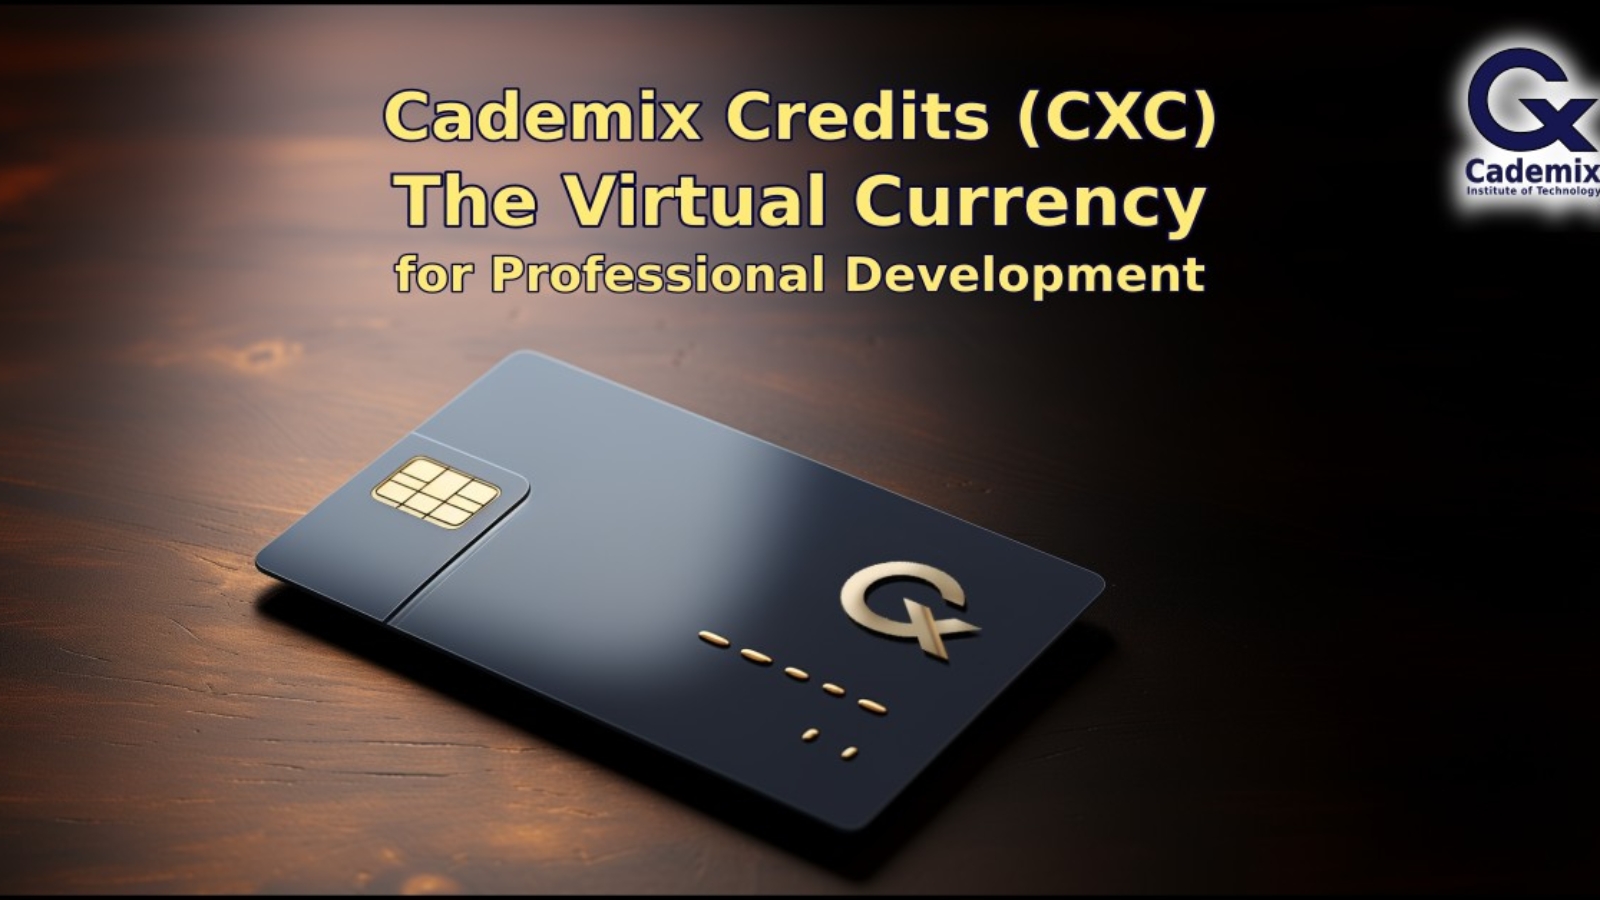 Cademix Credits CXC Virtual Currency for Professional and Career Development